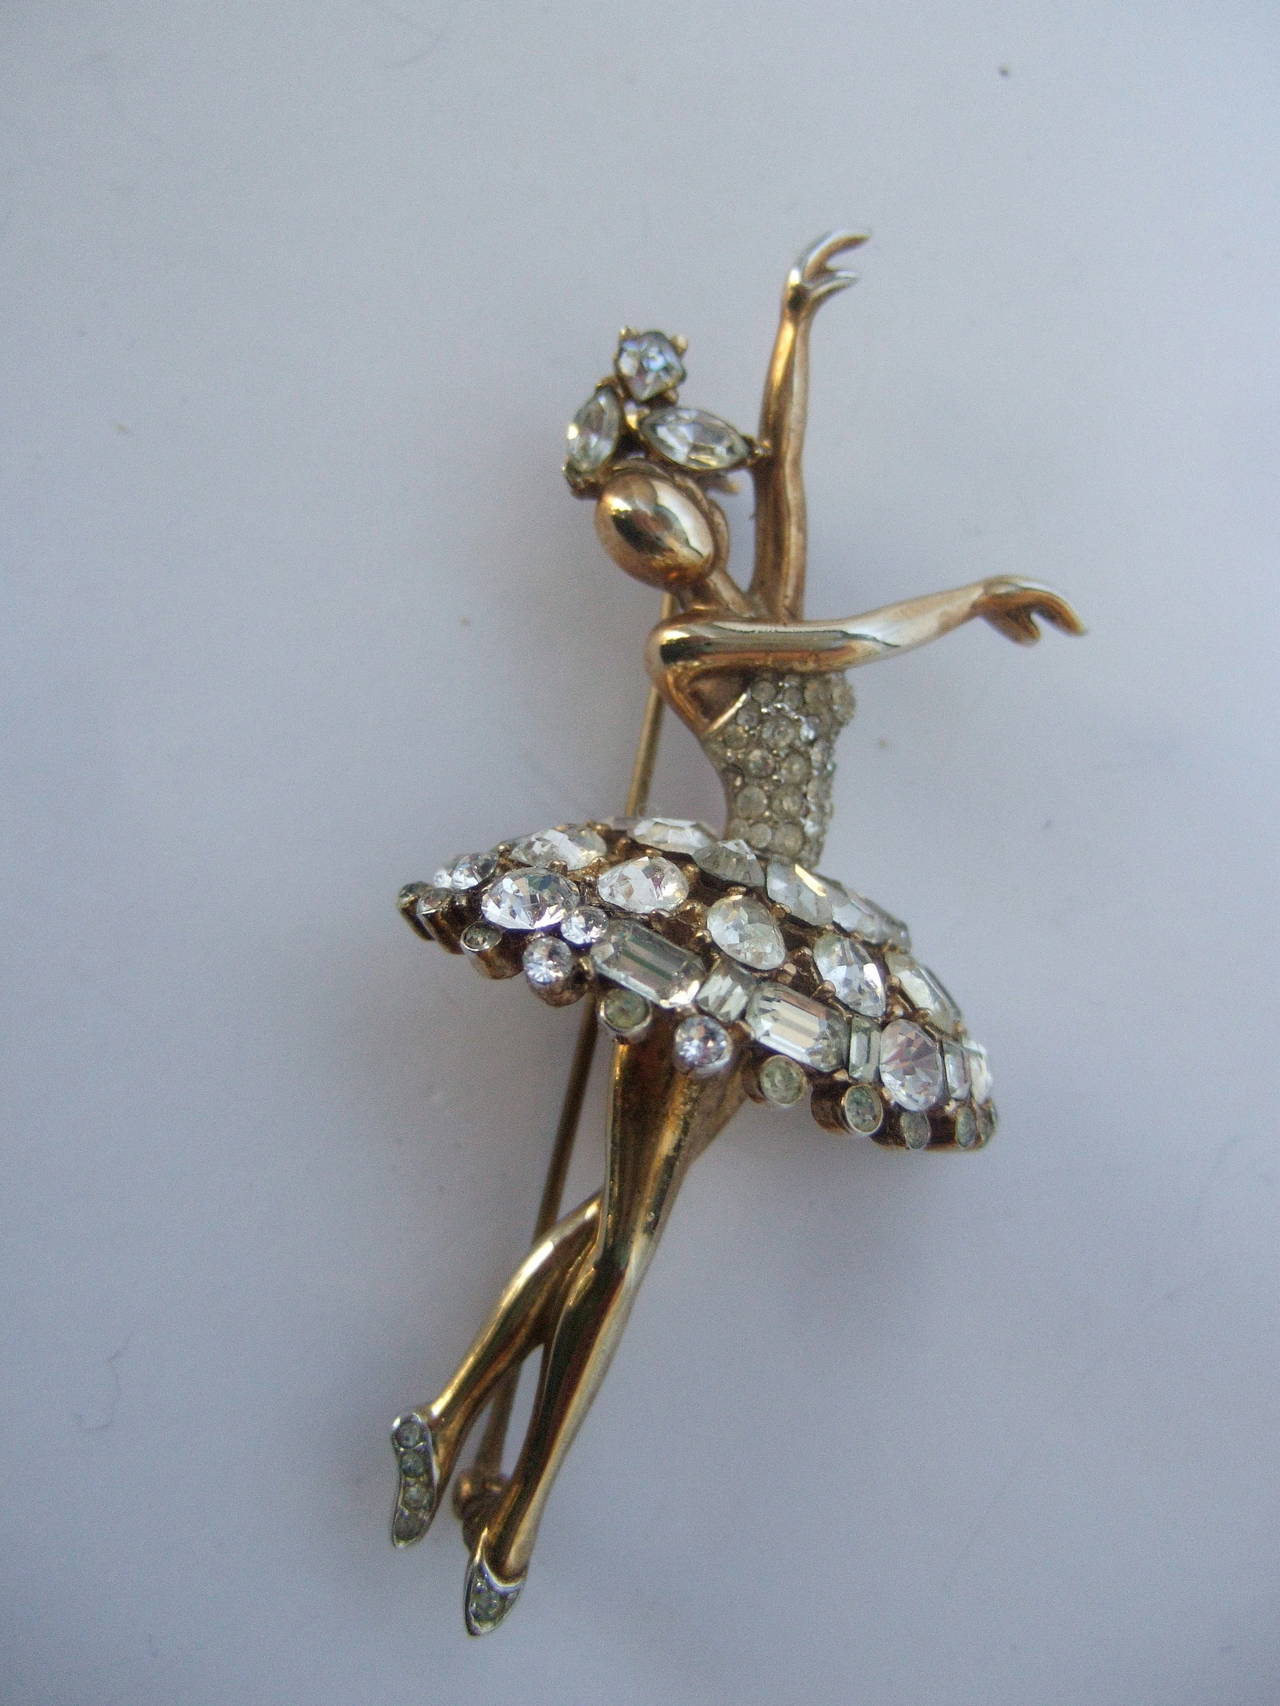 Trifari figural crystal jewel encrusted ballerina brooch c 1950
The mid-century designer costume brooch captures an elegant ballerina in various pirouette postures

Her headpiece, bodice, tutu & slippers are embellished with glittering diamante